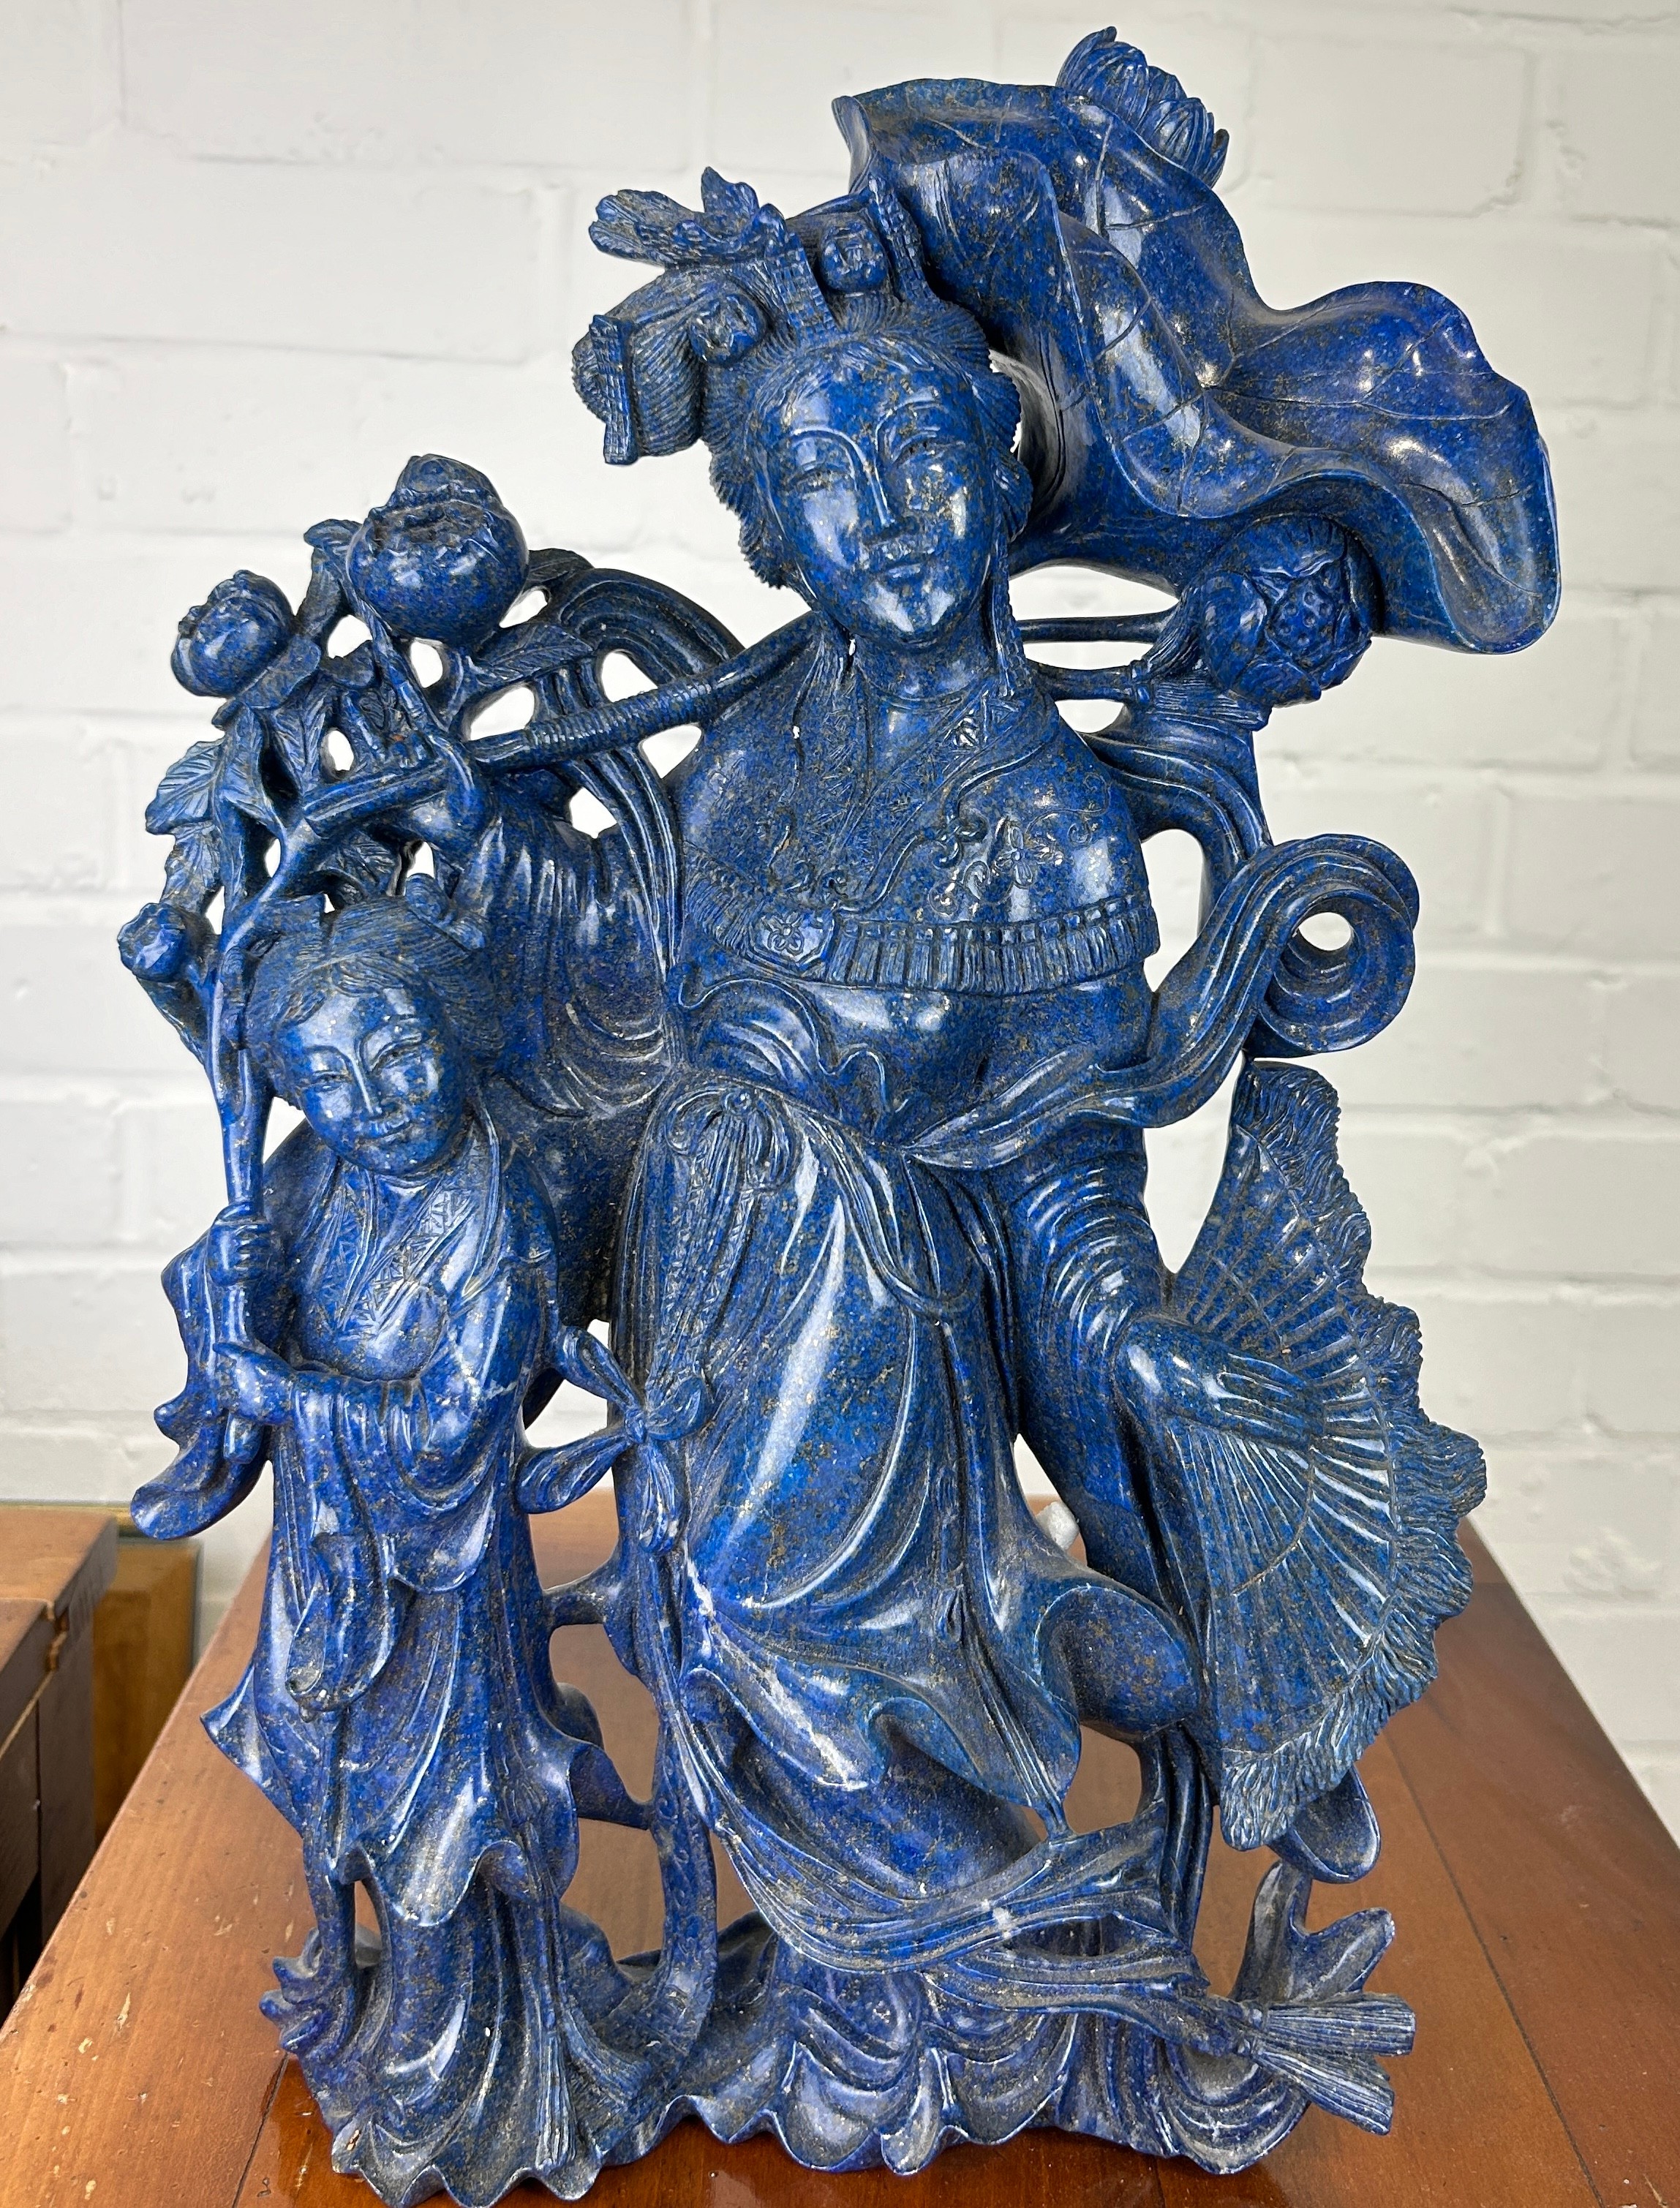 A LARGE EARLY 20TH CENTURY CHINESE LAPIS LAZULI SCULPTURE DEPICTING TWO GUANYINS, 40cm x 25cm